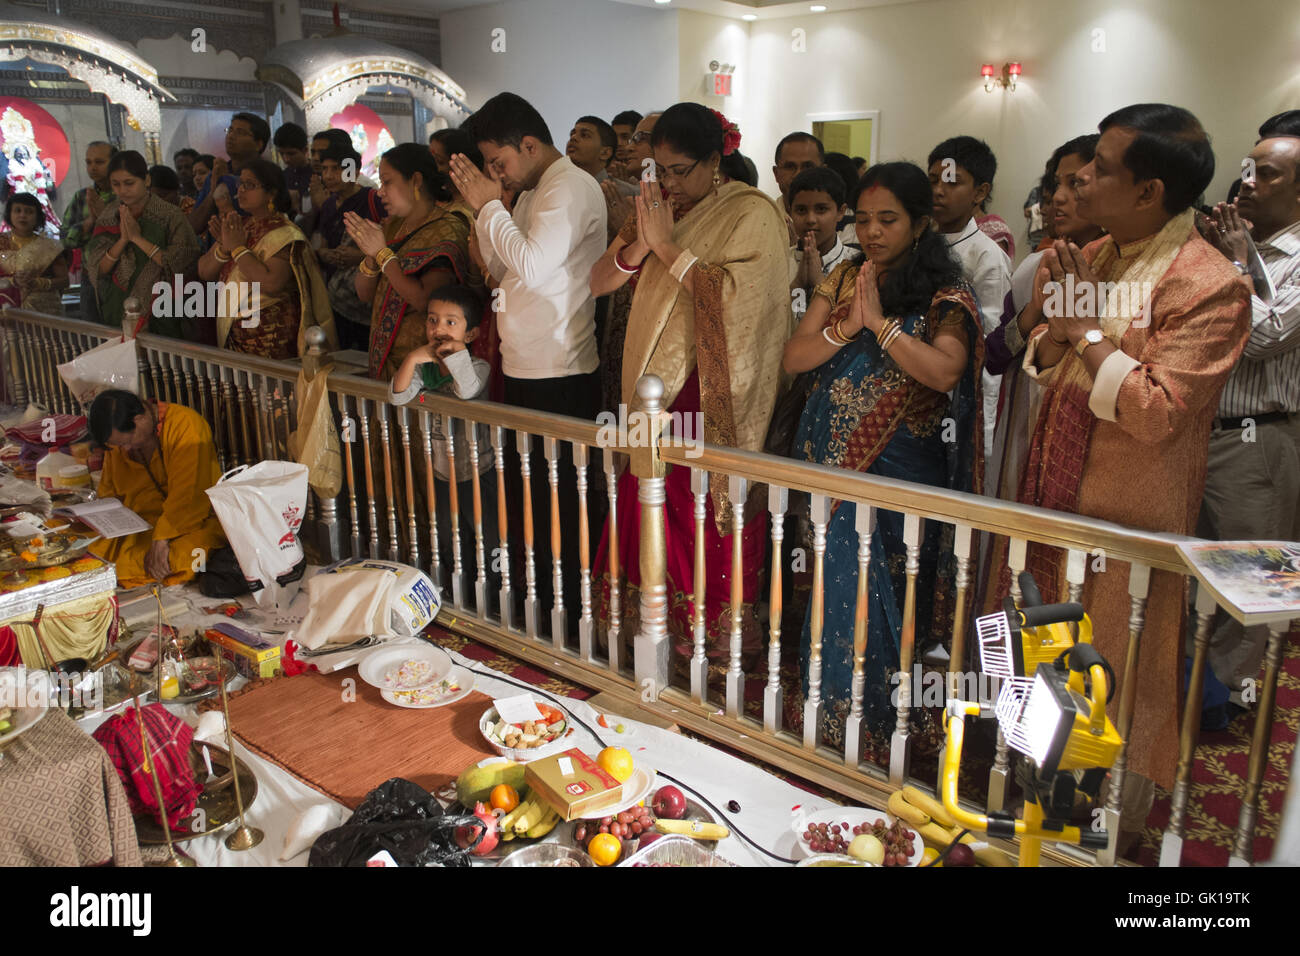 Worship at Hindu temple in 'Little India' in Queens, New York, 2013. Stock Photo